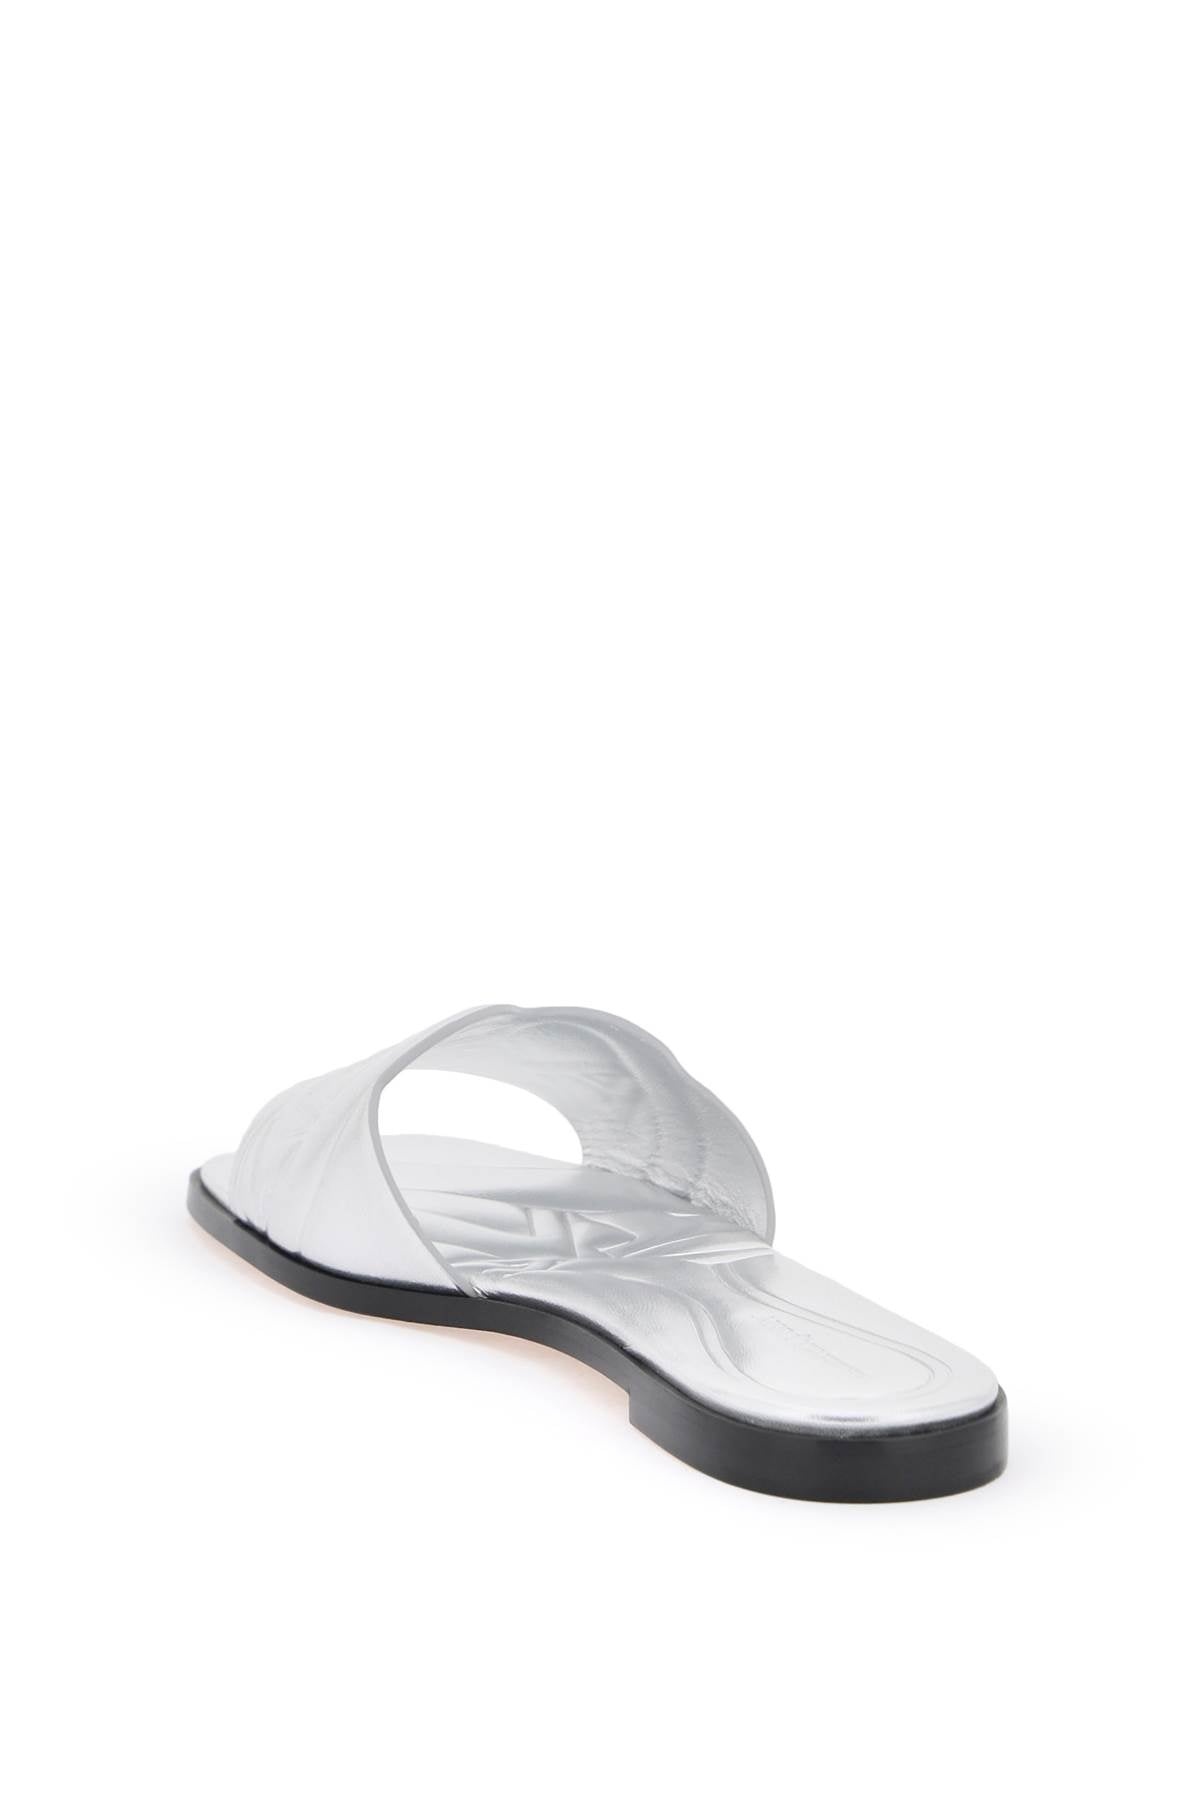 Alexander Mcqueen Laminated Leather Slides With Embossed Seal Logo Women - 3